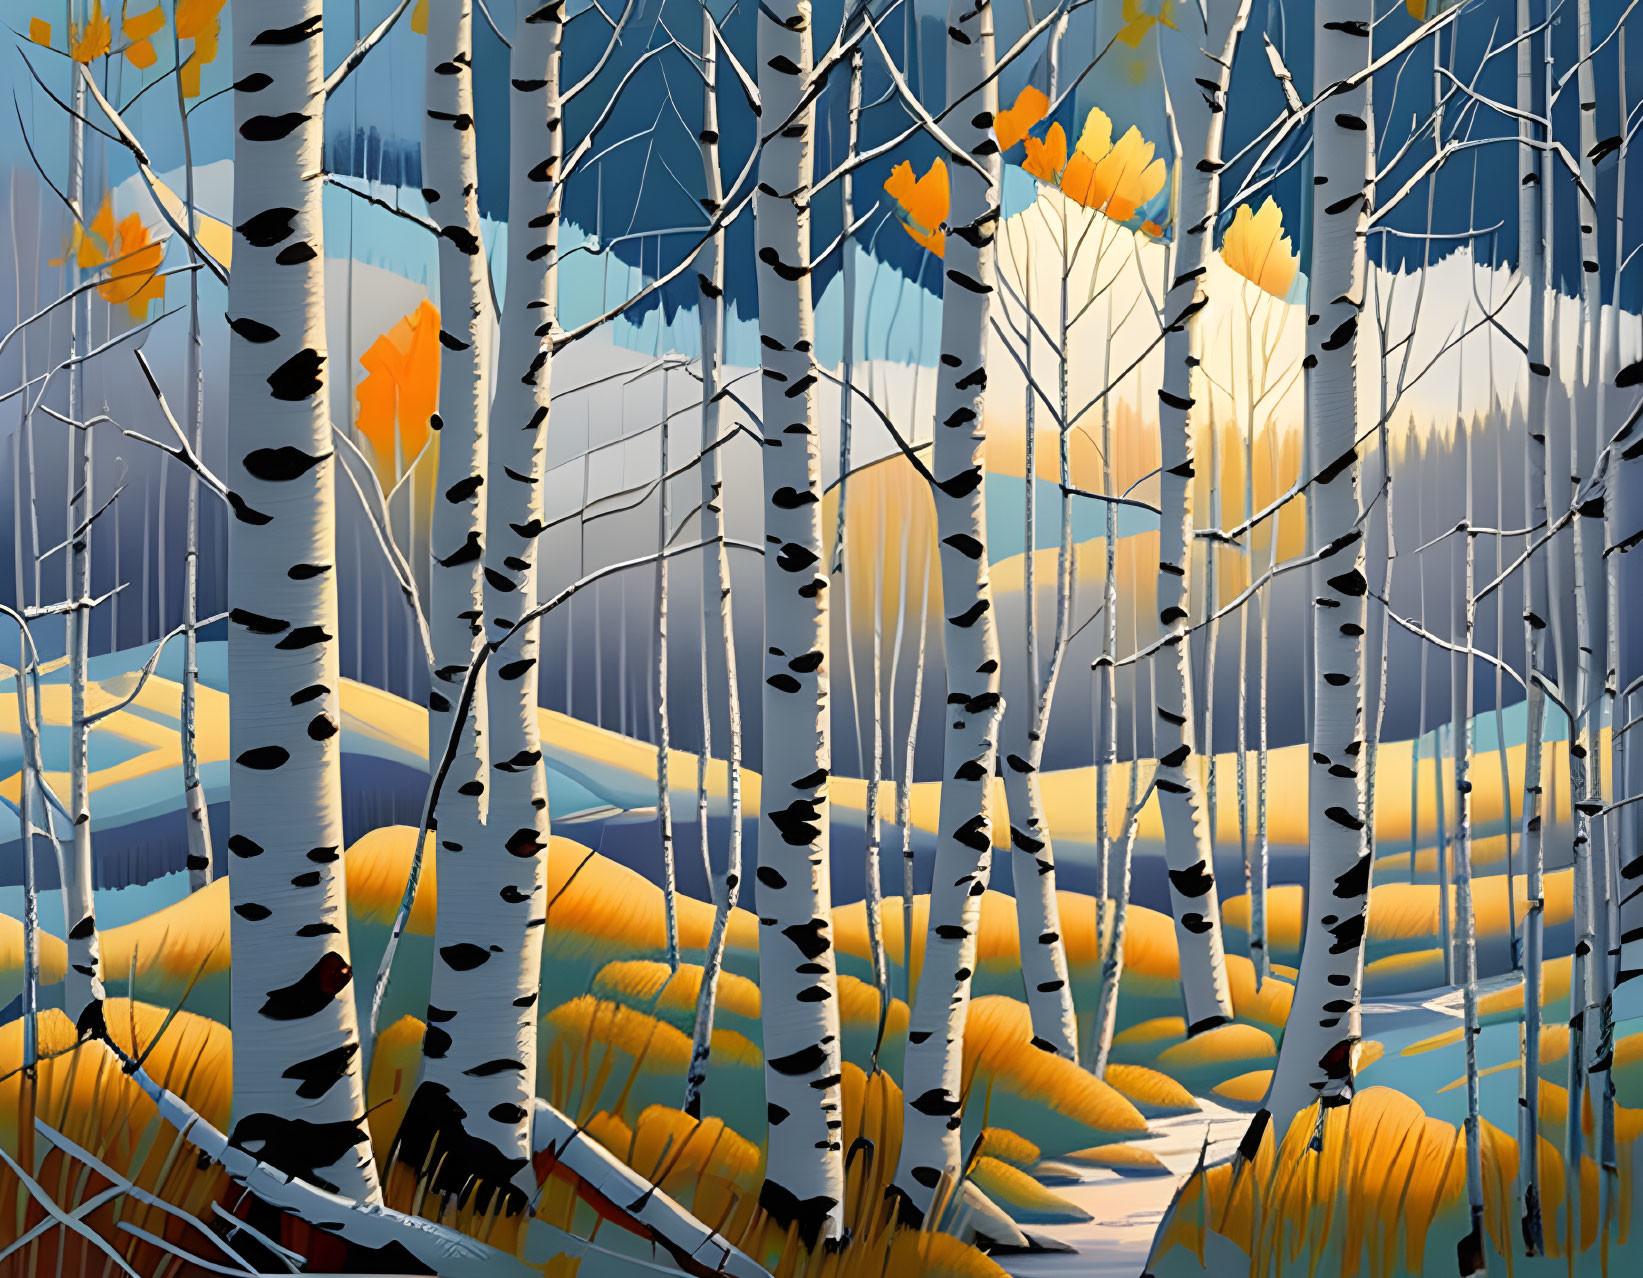 Birch Forest in Autumn with Golden Leaves and White Trunks